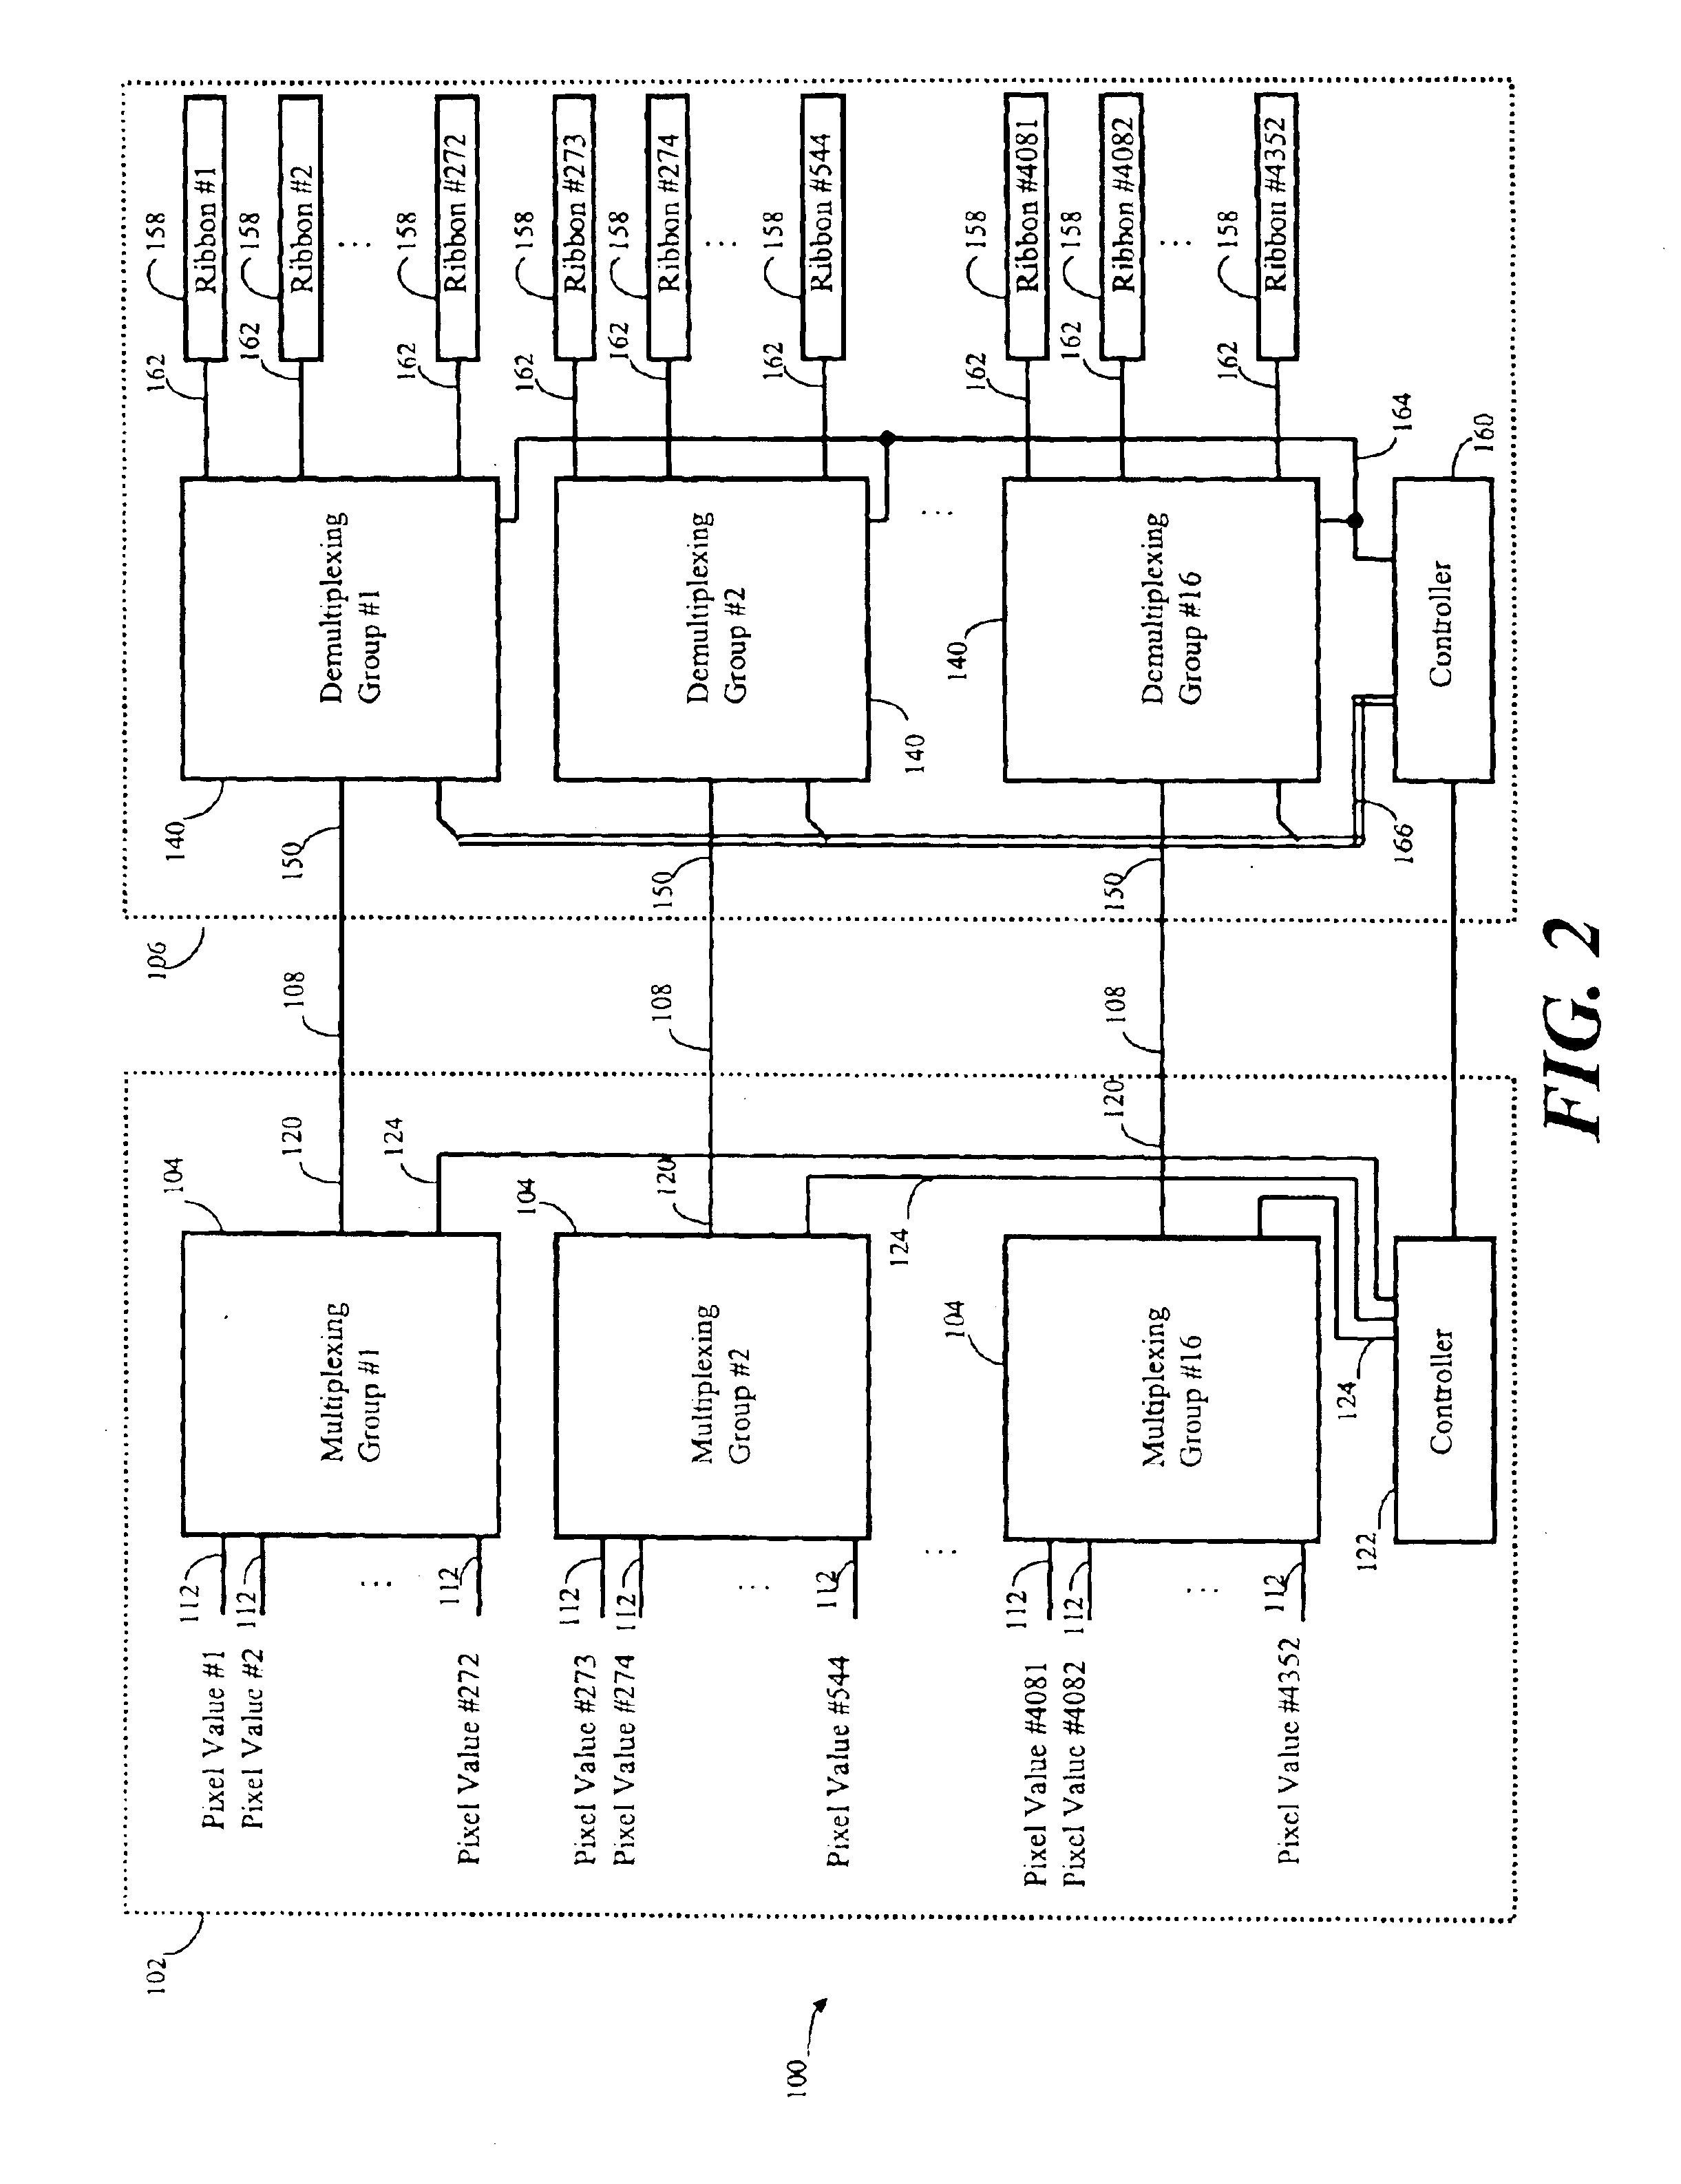 Ultra-high resolution light modulation control system and method